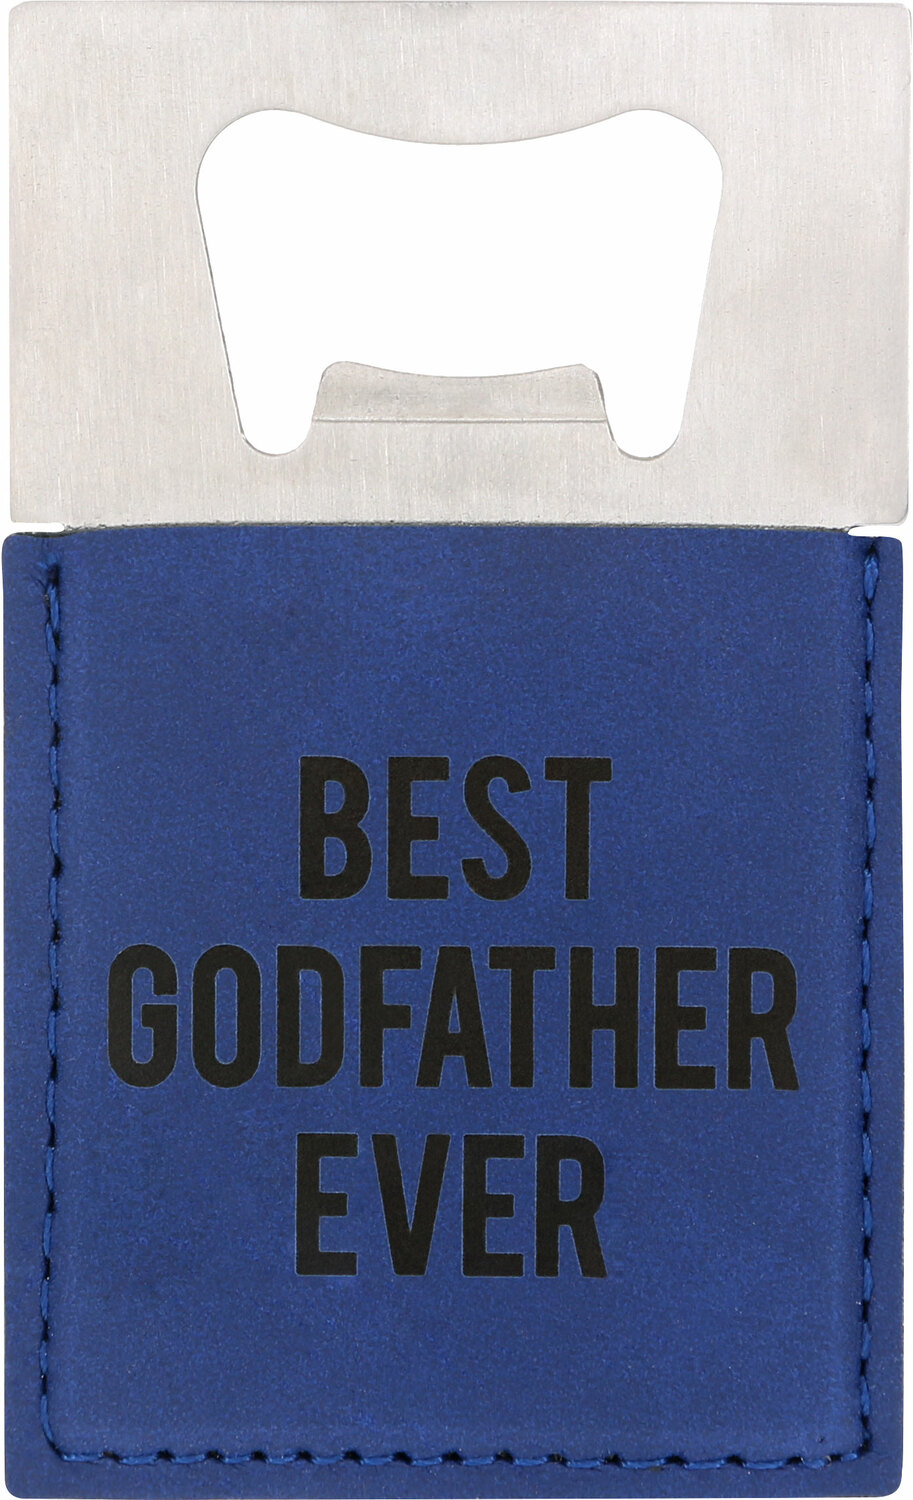 Godfather by Man Made - Godfather - 2" x 3.5" Bottle Opener Magnet